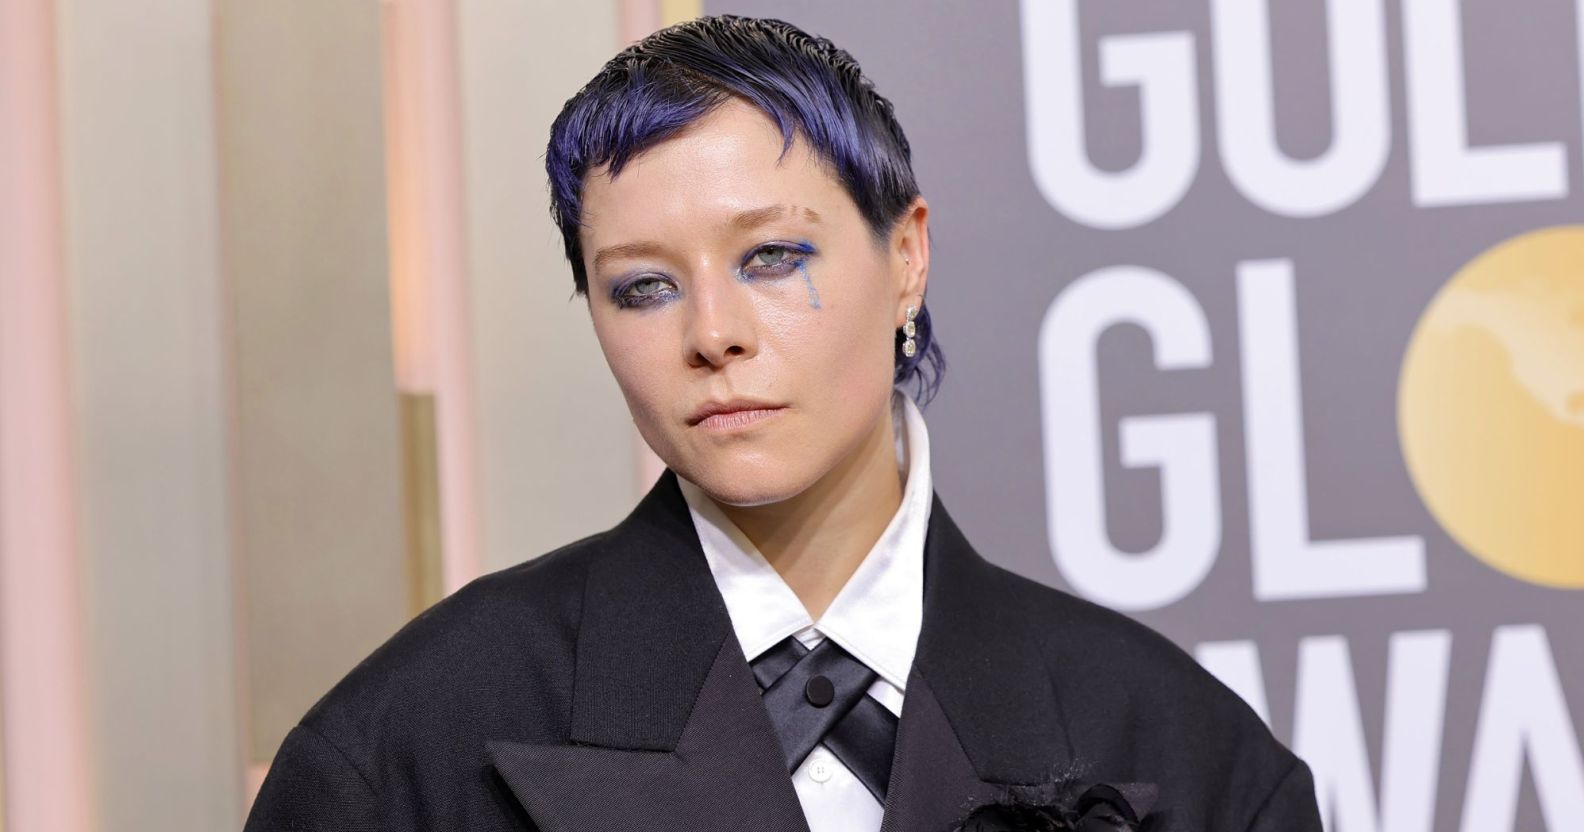 Actor Emma D'Arcy on the Golden Globes red carpet wearing a black suit with cropped purple hair.